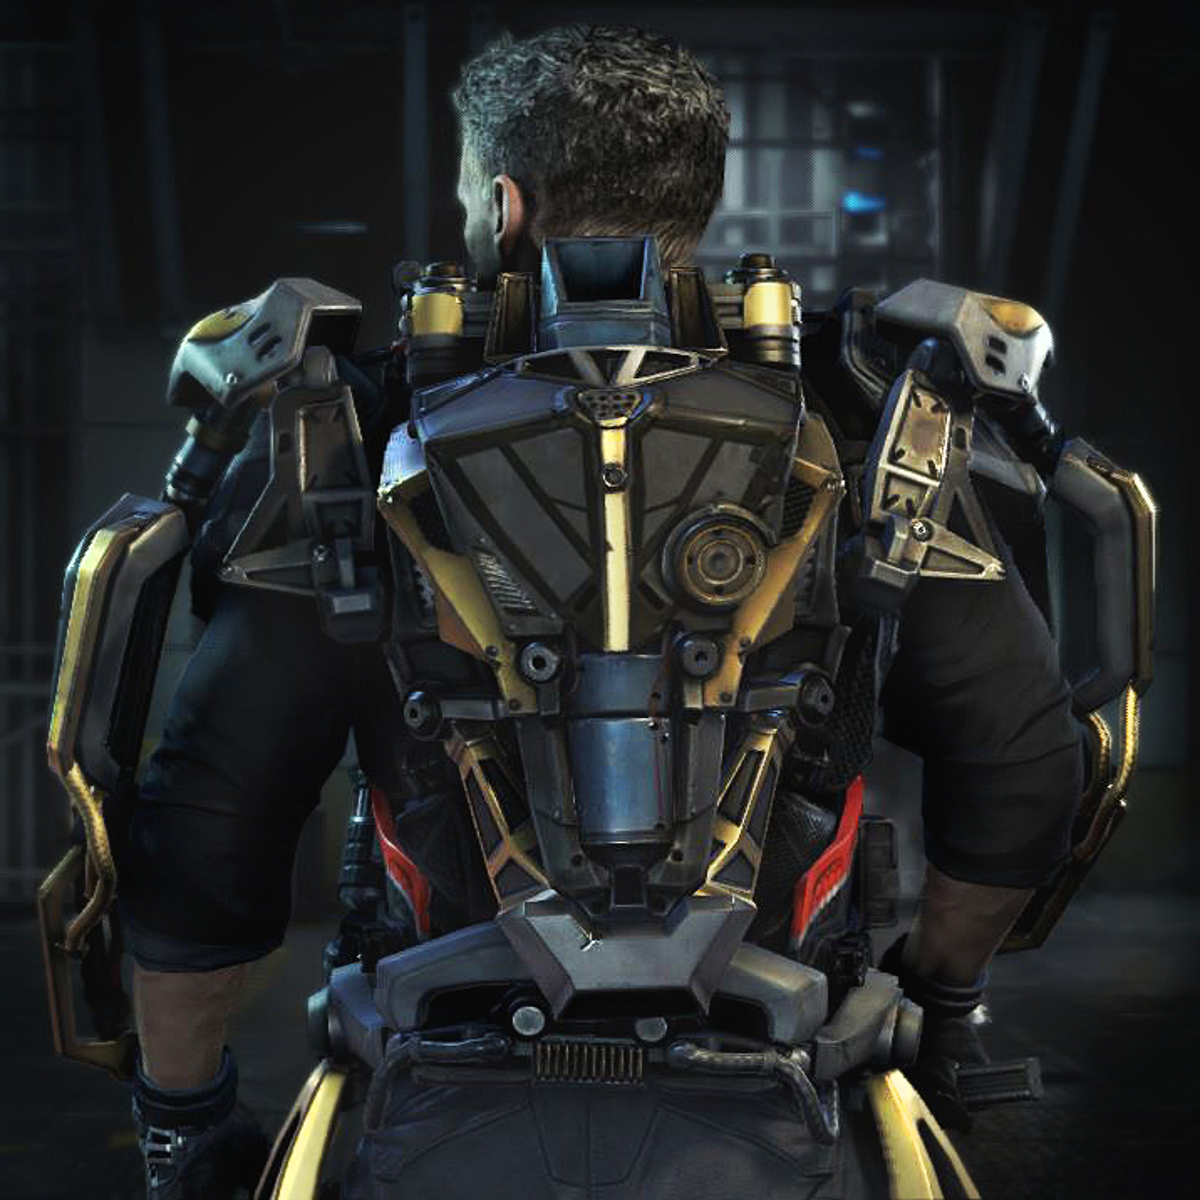 Call of Duty: Advanced Warfare Companion App Now Available in Google Play